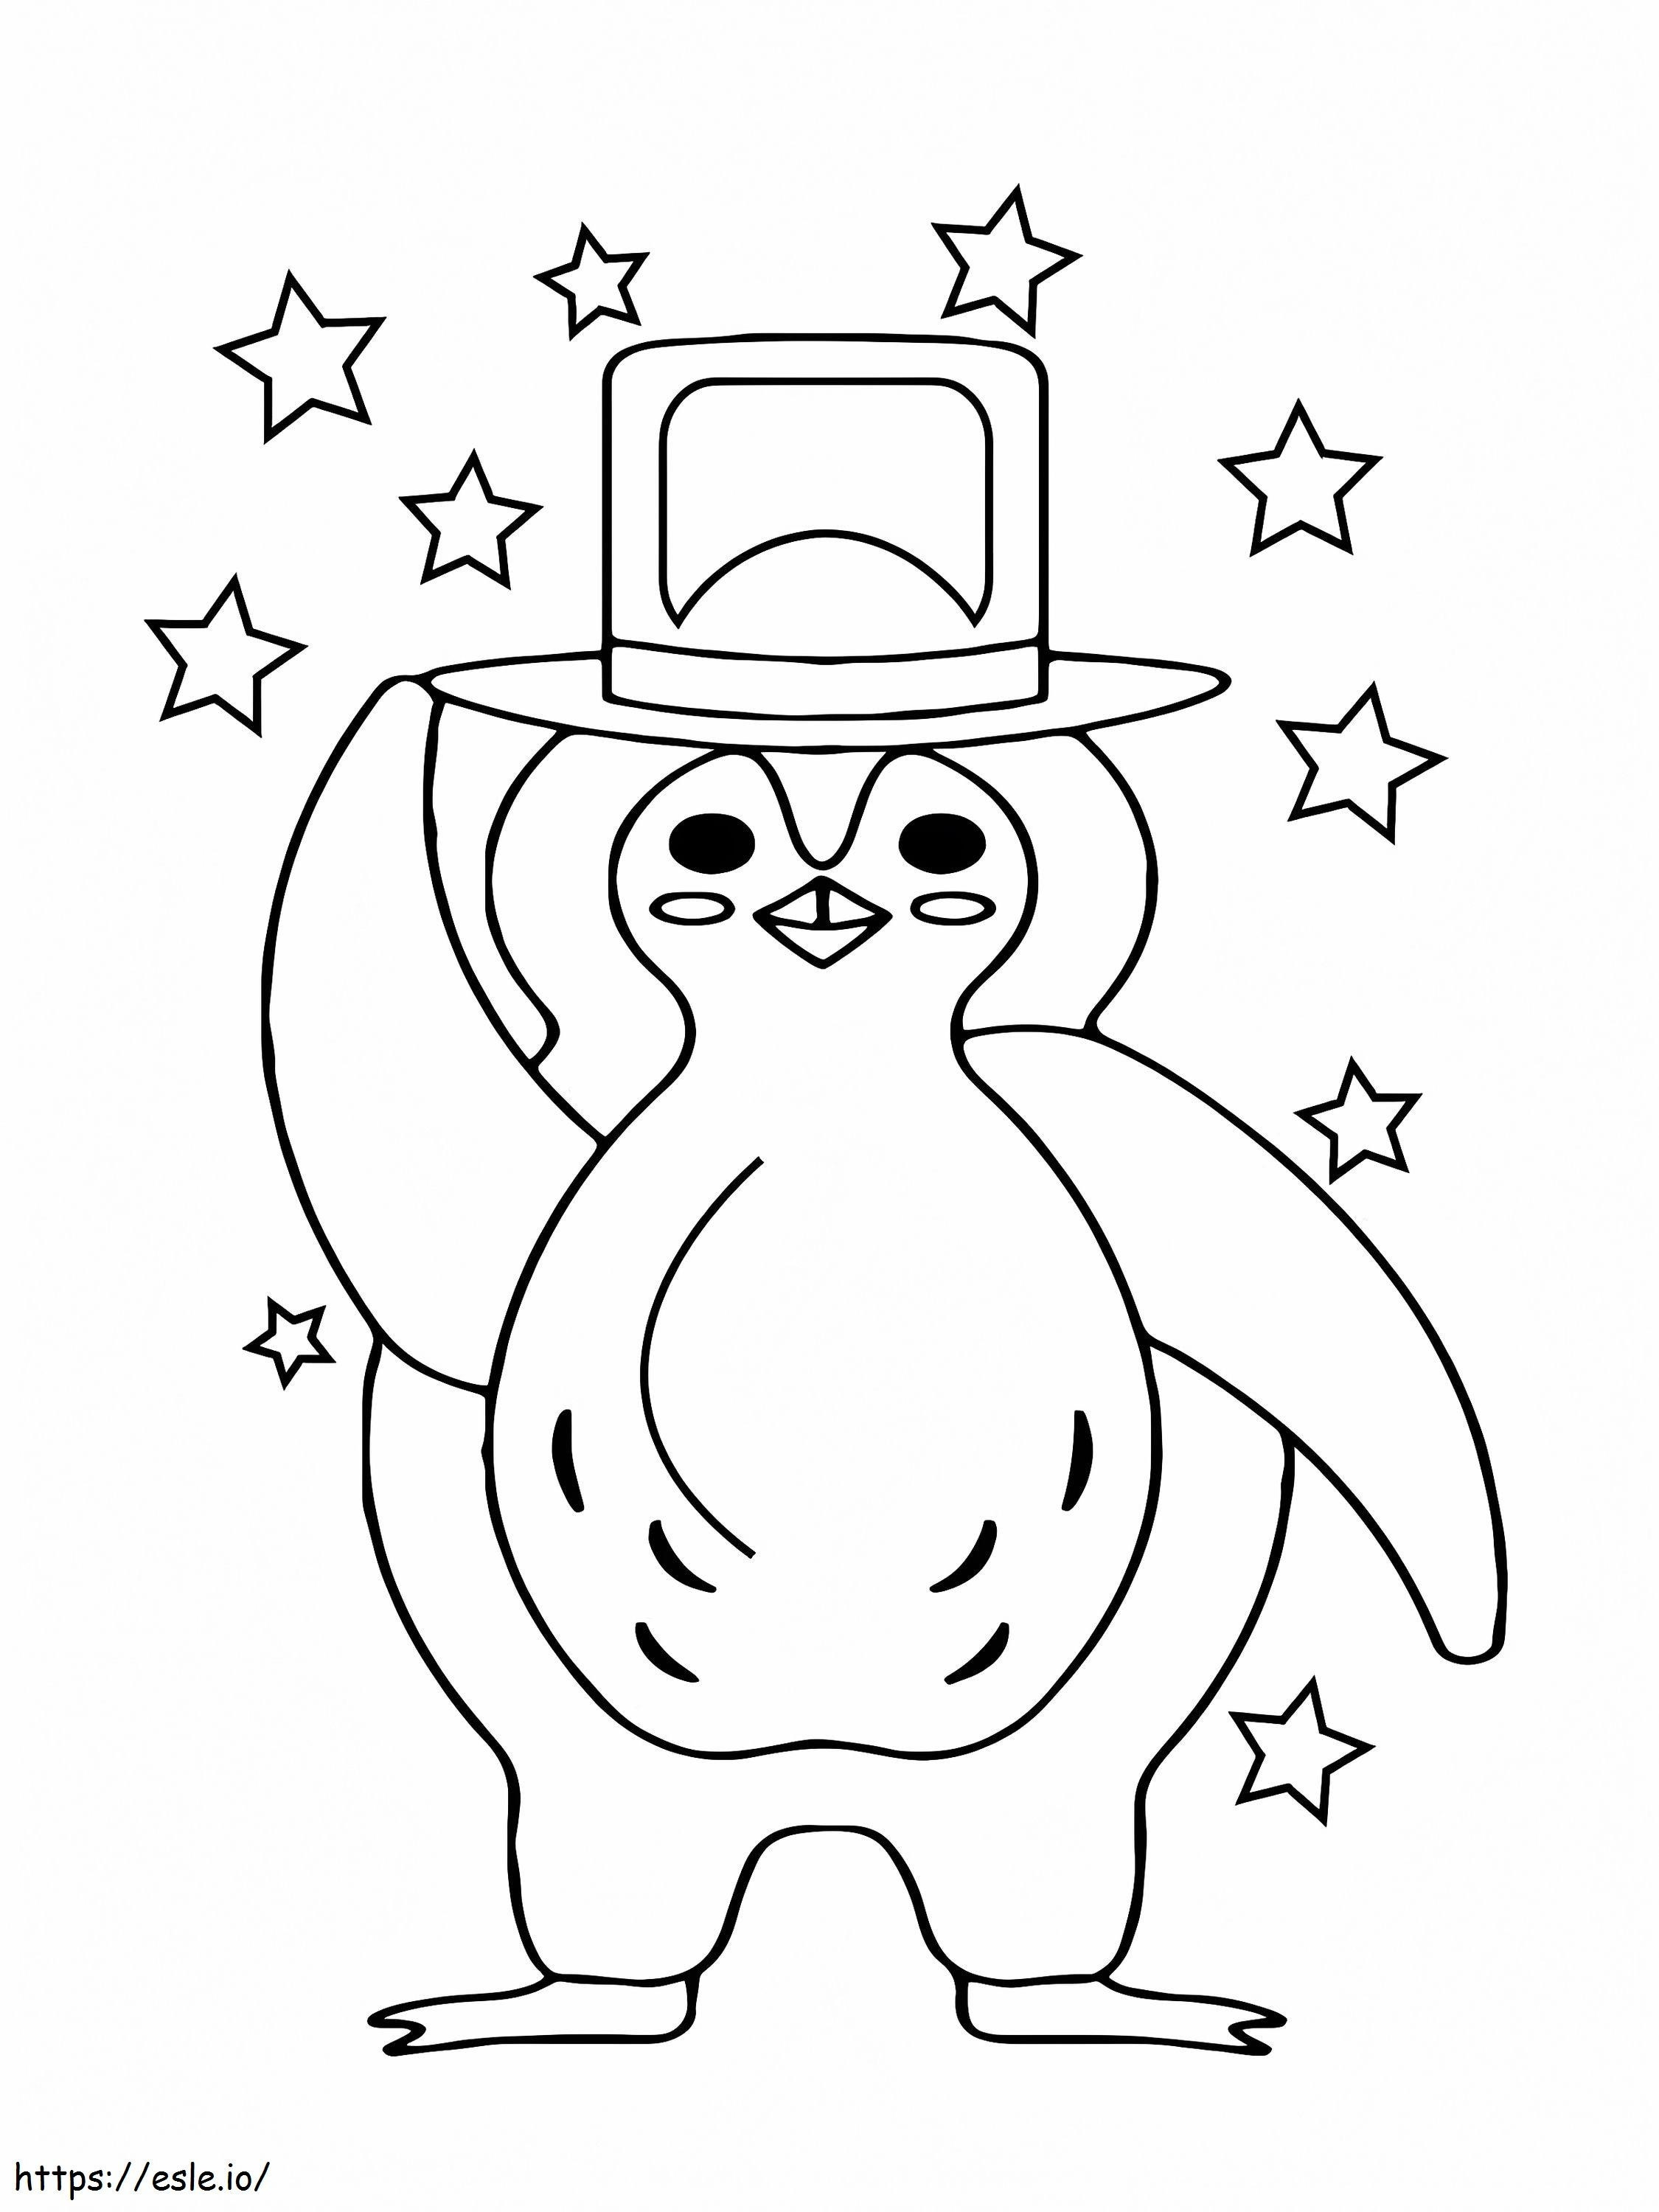 Glittering Christmas Penguin coloring page